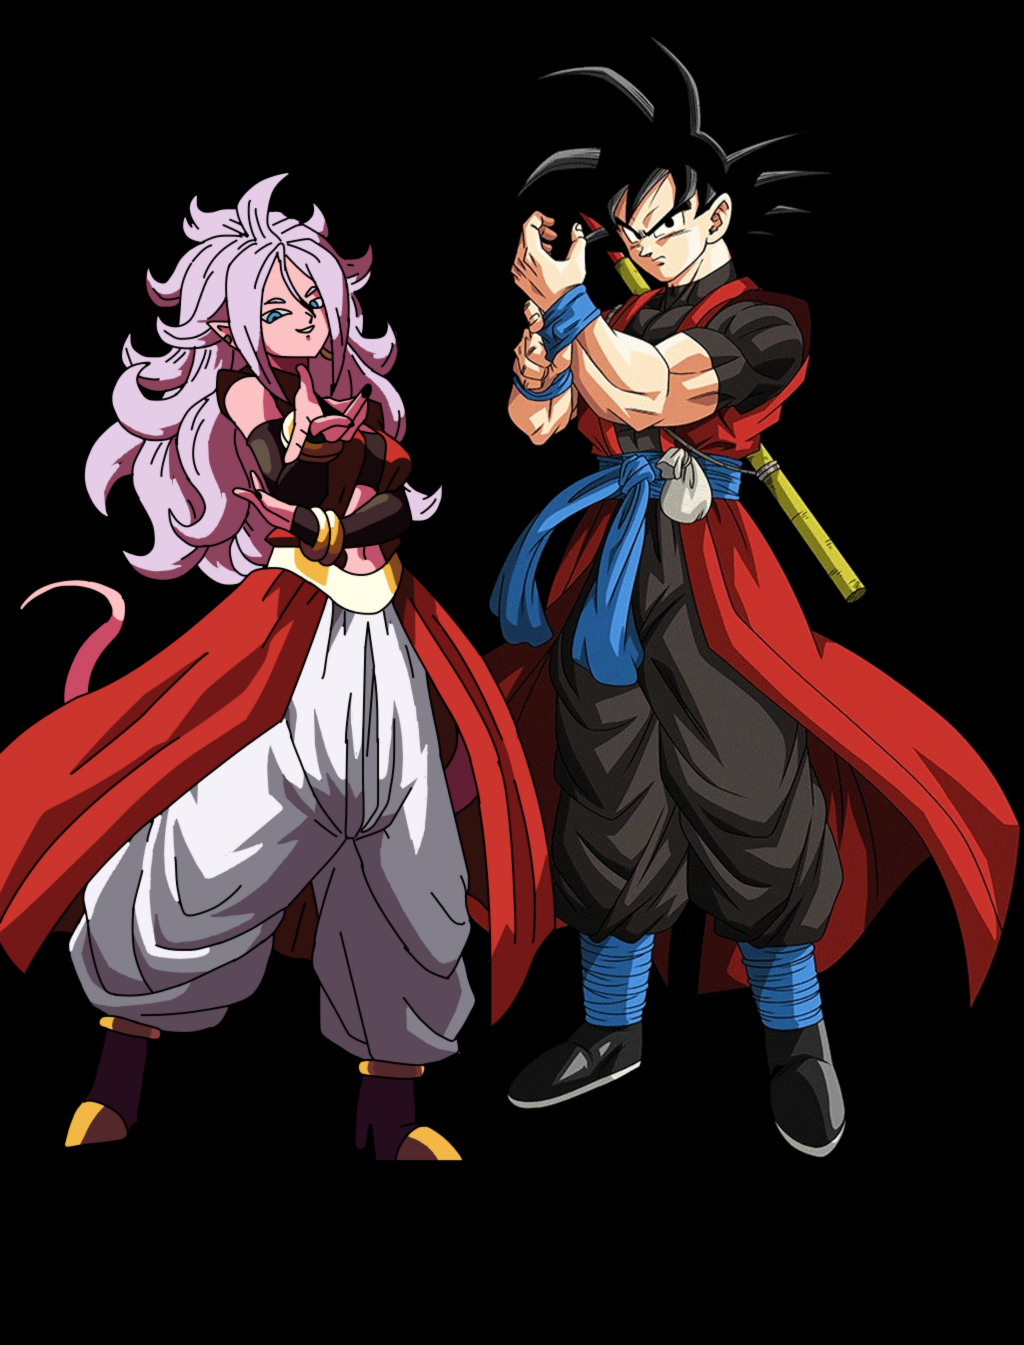 Goku x Android 21 by Qsky on DeviantArt